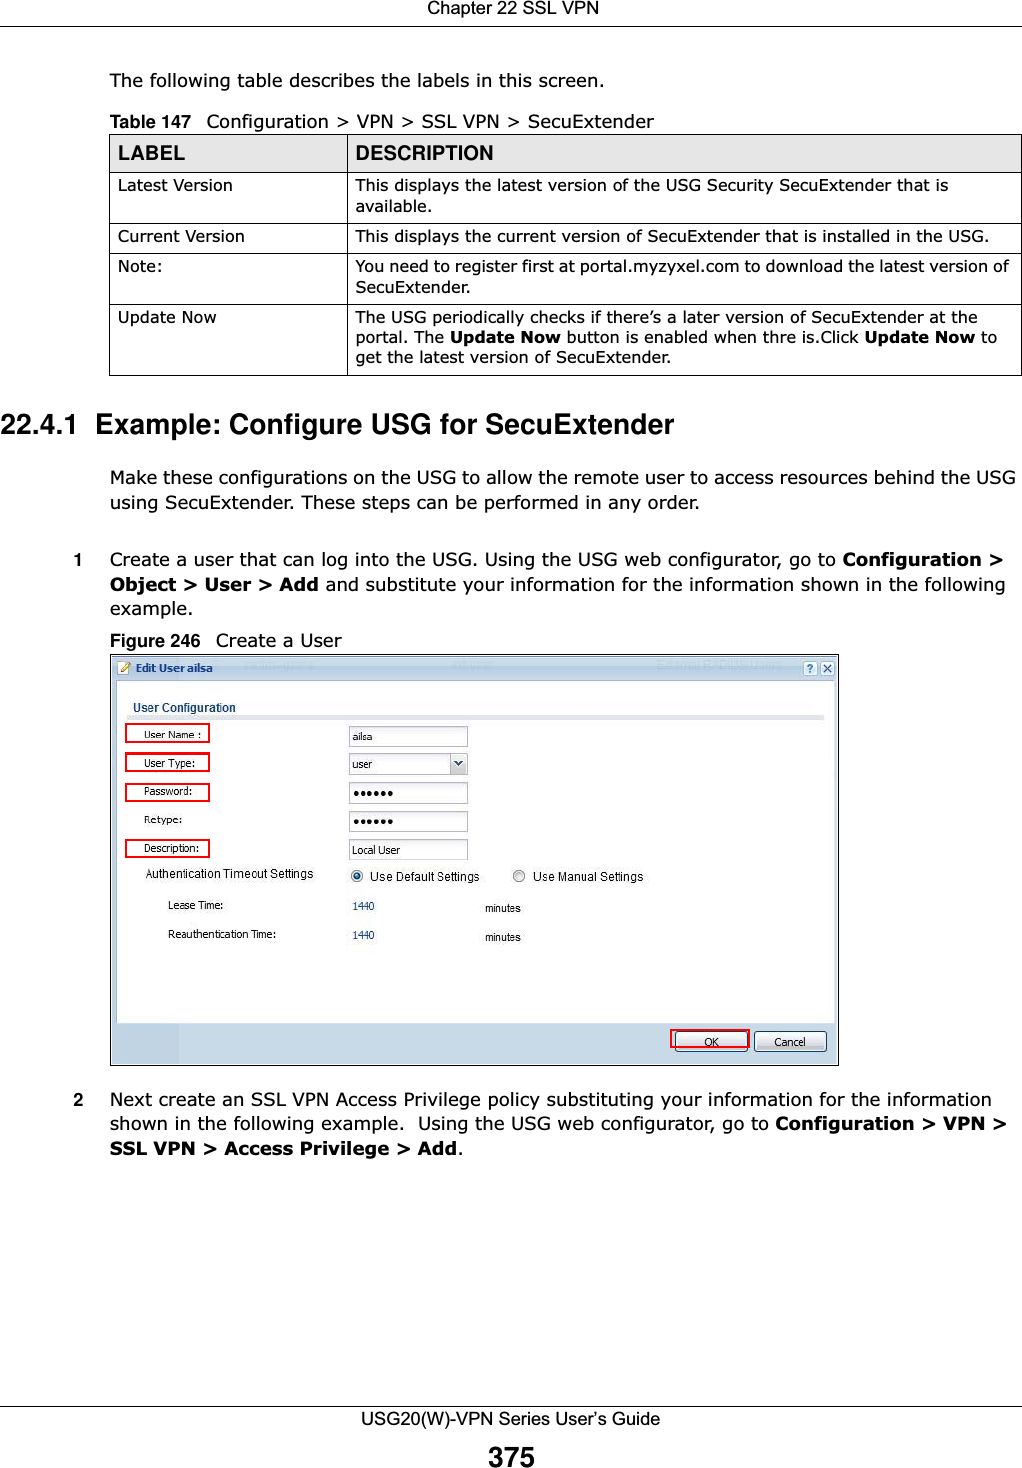  Chapter 22 SSL VPNUSG20(W)-VPN Series User’s Guide375The following table describes the labels in this screen.22.4.1  Example: Configure USG for SecuExtenderMake these configurations on the USG to allow the remote user to access resources behind the USG using SecuExtender. These steps can be performed in any order.1Create a user that can log into the USG. Using the USG web configurator, go to Configuration &gt; Object &gt; User &gt; Add and substitute your information for the information shown in the following example.Figure 246   Create a User2Next create an SSL VPN Access Privilege policy substituting your information for the information shown in the following example.  Using the USG web configurator, go to Configuration &gt; VPN &gt; SSL VPN &gt; Access Privilege &gt; Add.Table 147   Configuration &gt; VPN &gt; SSL VPN &gt; SecuExtenderLABEL DESCRIPTIONLatest Version This displays the latest version of the USG Security SecuExtender that is available.Current Version This displays the current version of SecuExtender that is installed in the USG.Note: You need to register first at portal.myzyxel.com to download the latest version of SecuExtender.Update Now The USG periodically checks if there’s a later version of SecuExtender at the portal. The Update Now button is enabled when thre is.Click Update Now to get the latest version of SecuExtender.